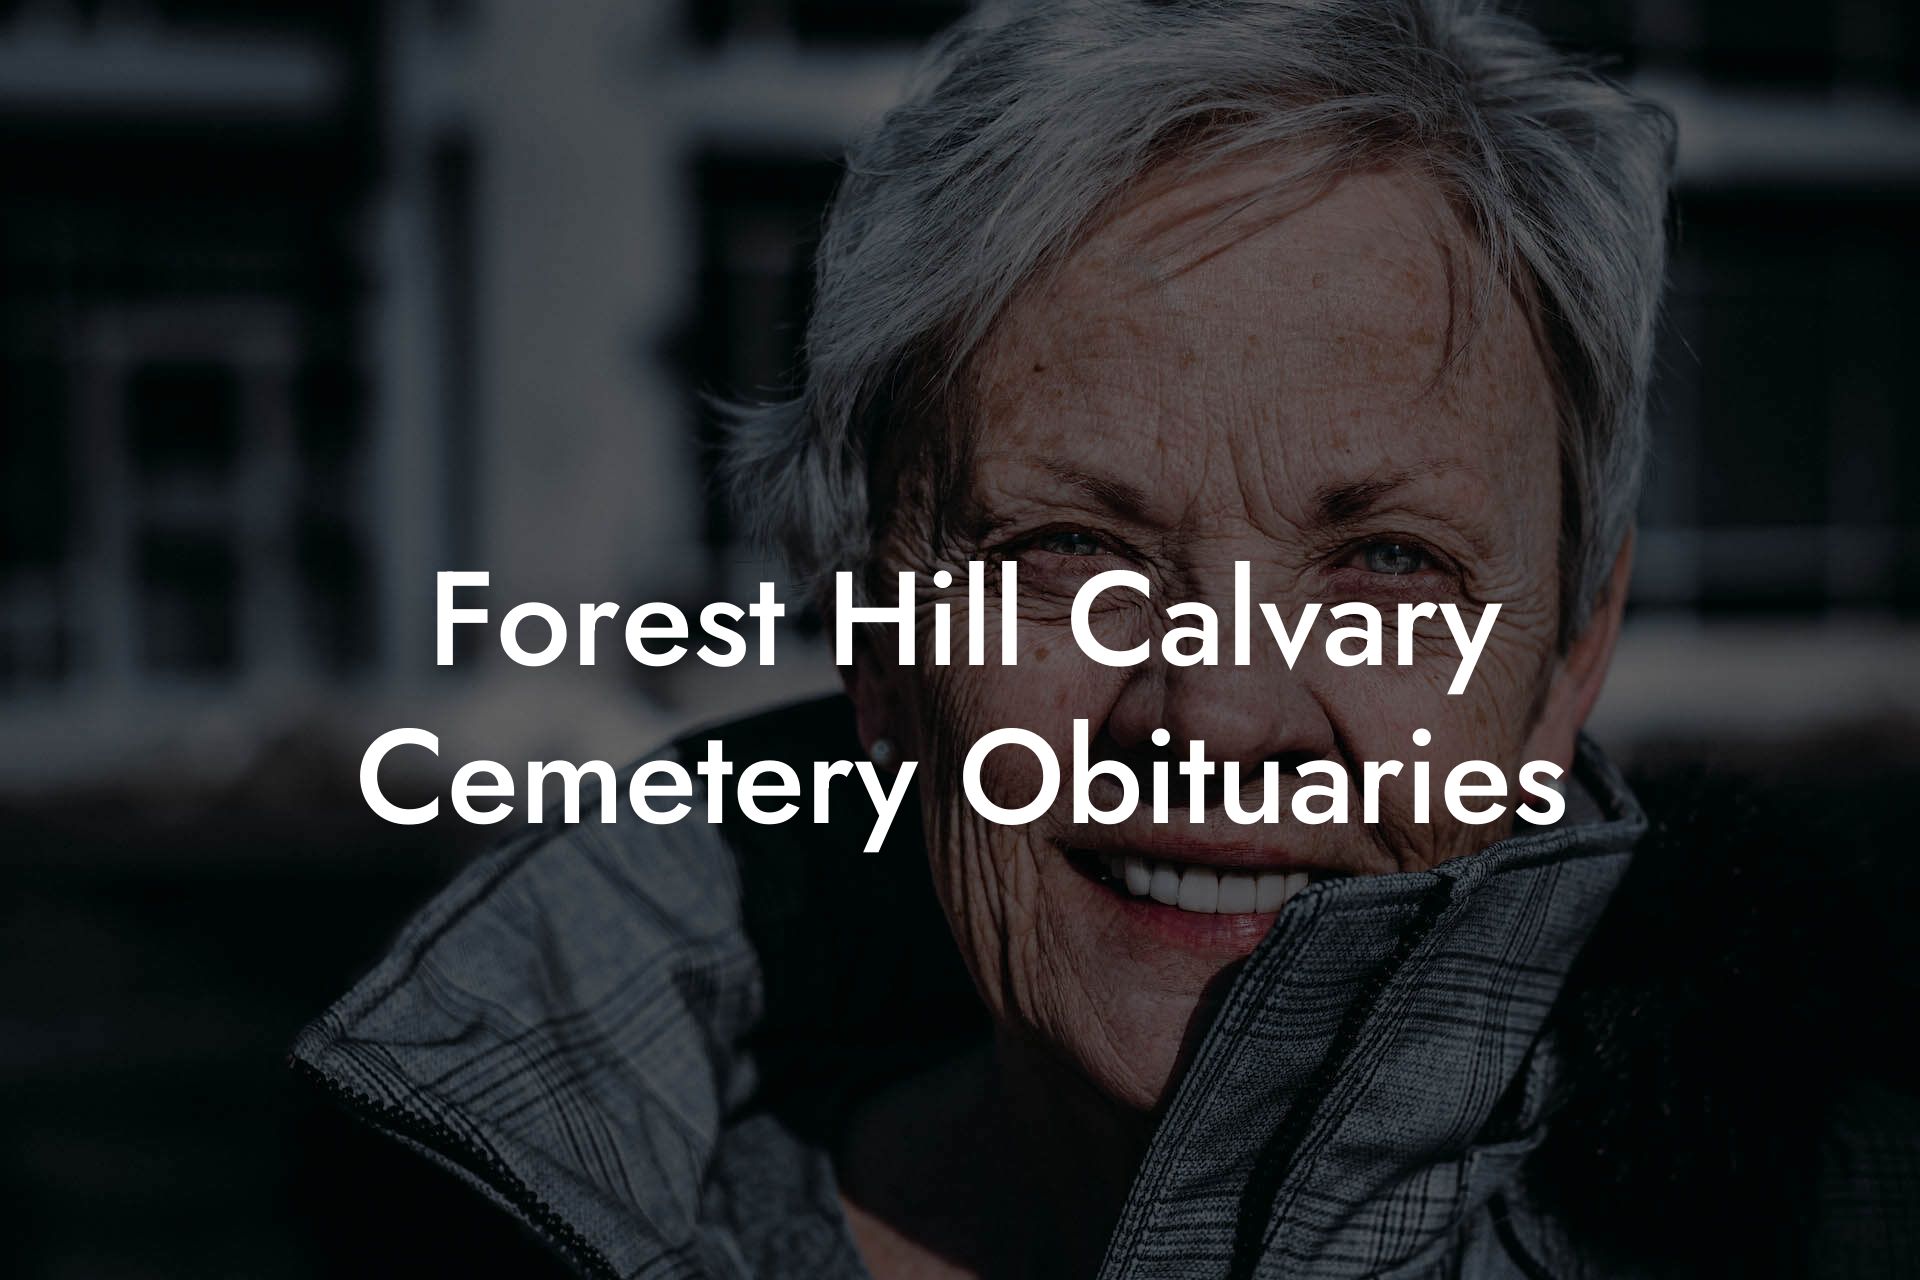 Forest Hill Calvary Cemetery Obituaries